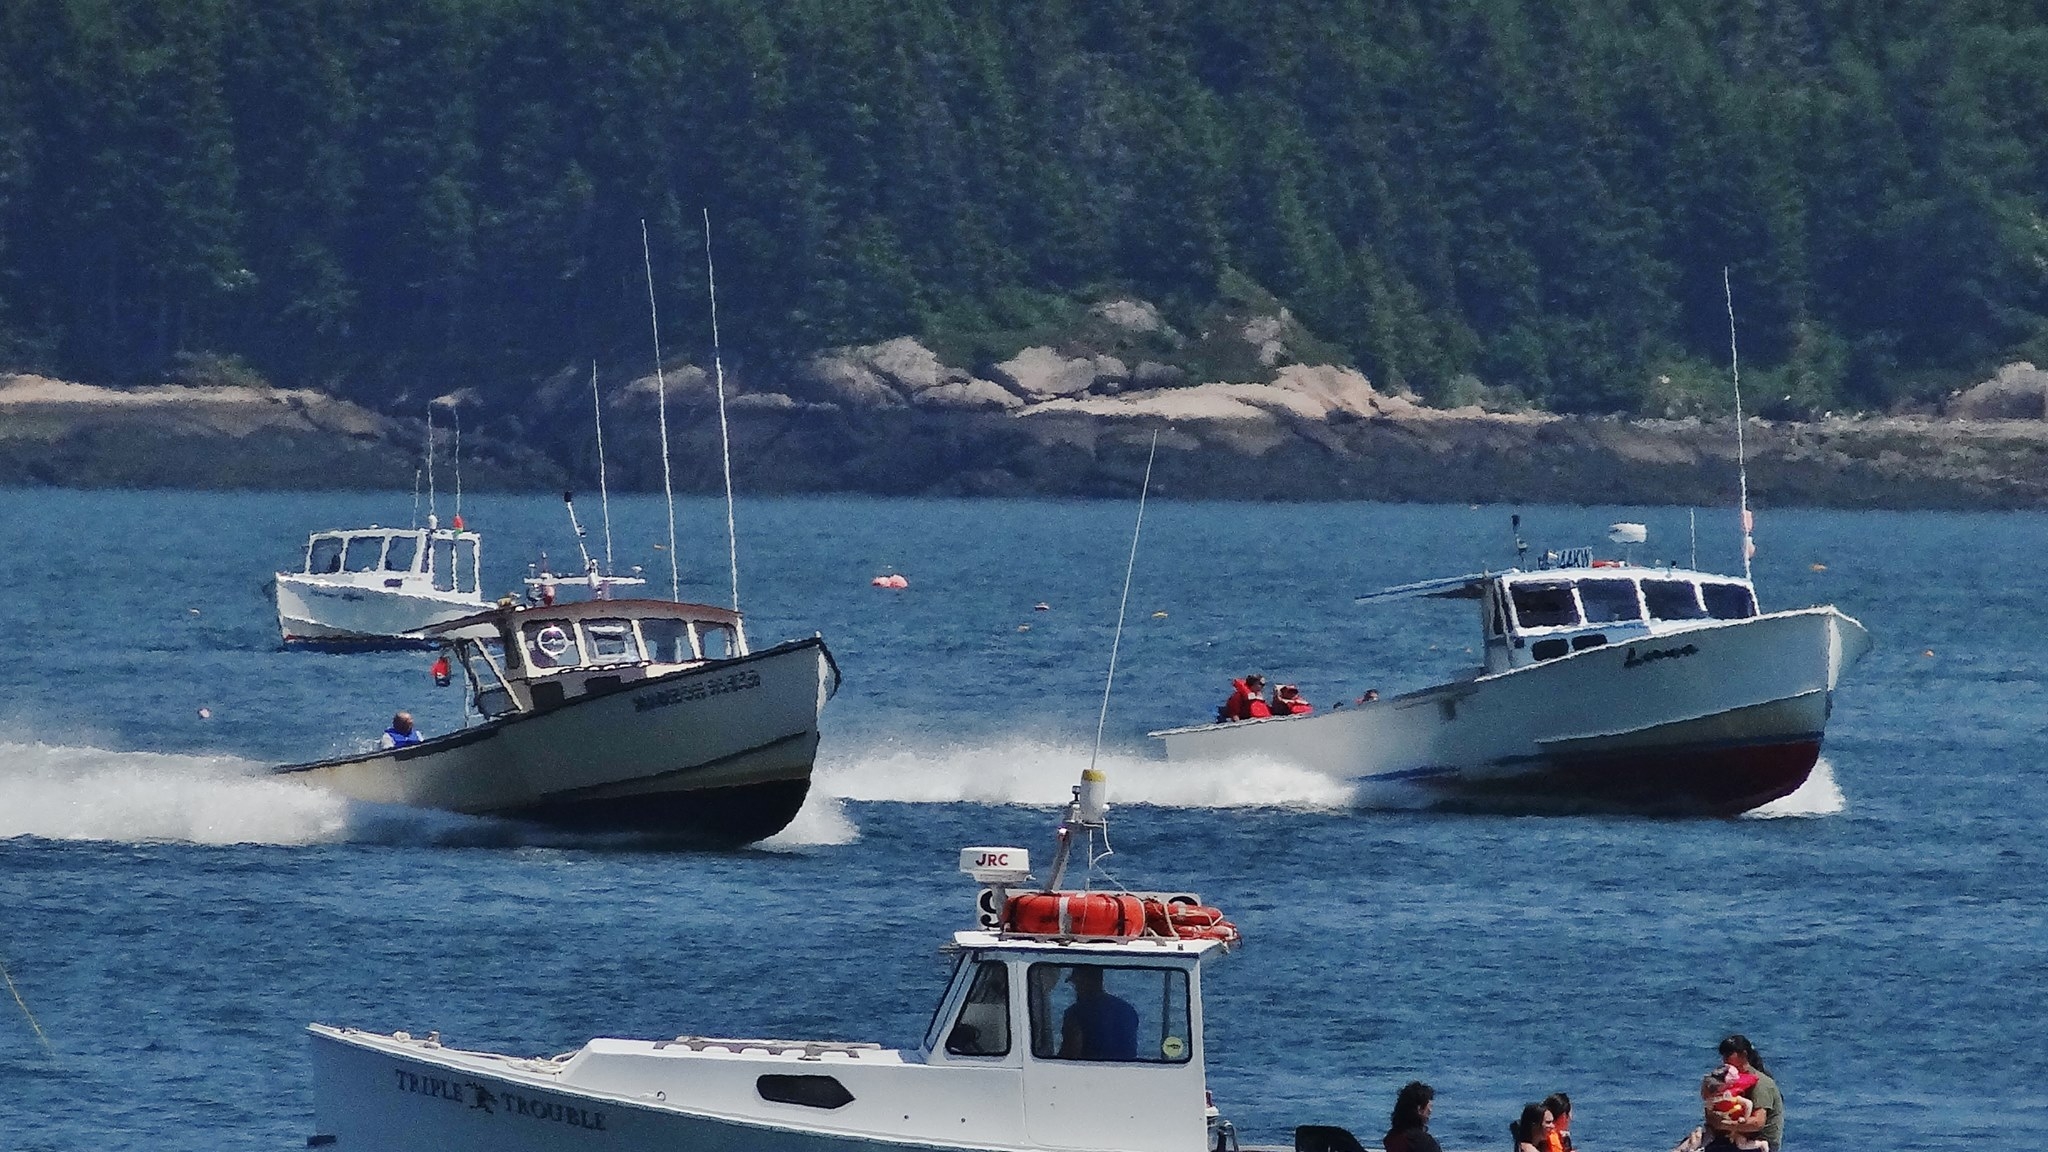 The Maine Lobster Boat Races Schedule 2018 | Maine-ly Lobster